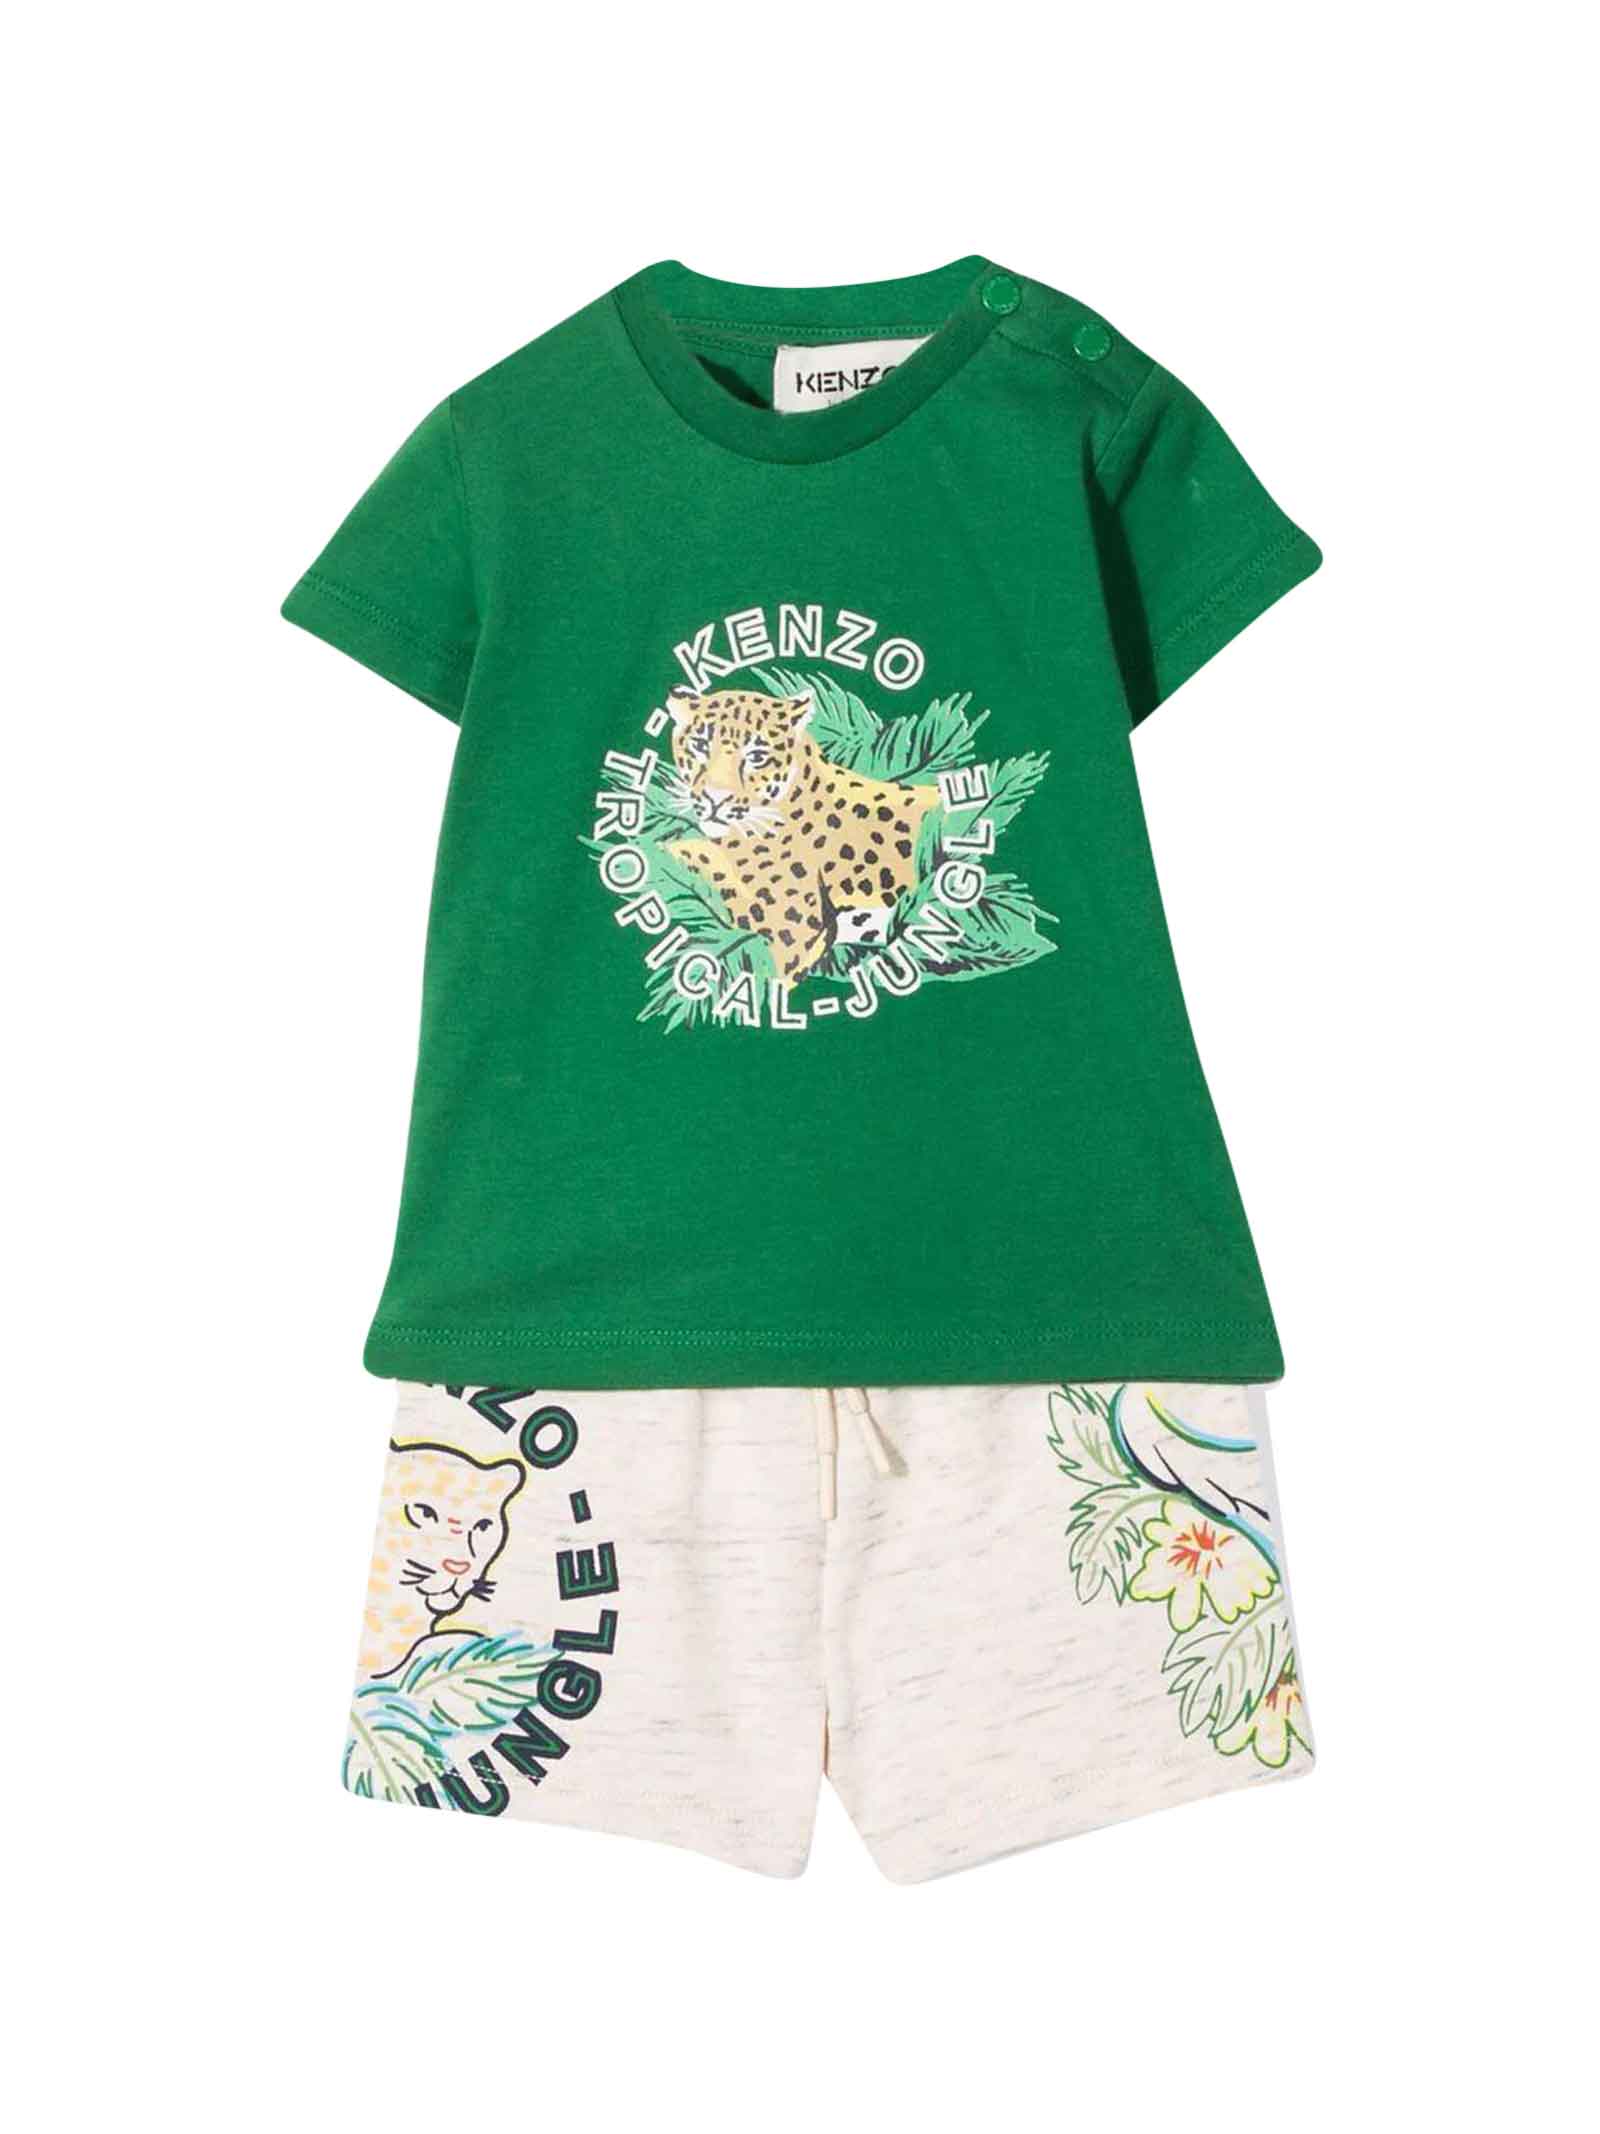 Kenzo Kids Newborn Two-piece Set With Green T-shirt And Gray Shorts, With Front Print, Round Neckline, Buttoning On The Shoulder, Short Sleeves, Straight Hem By